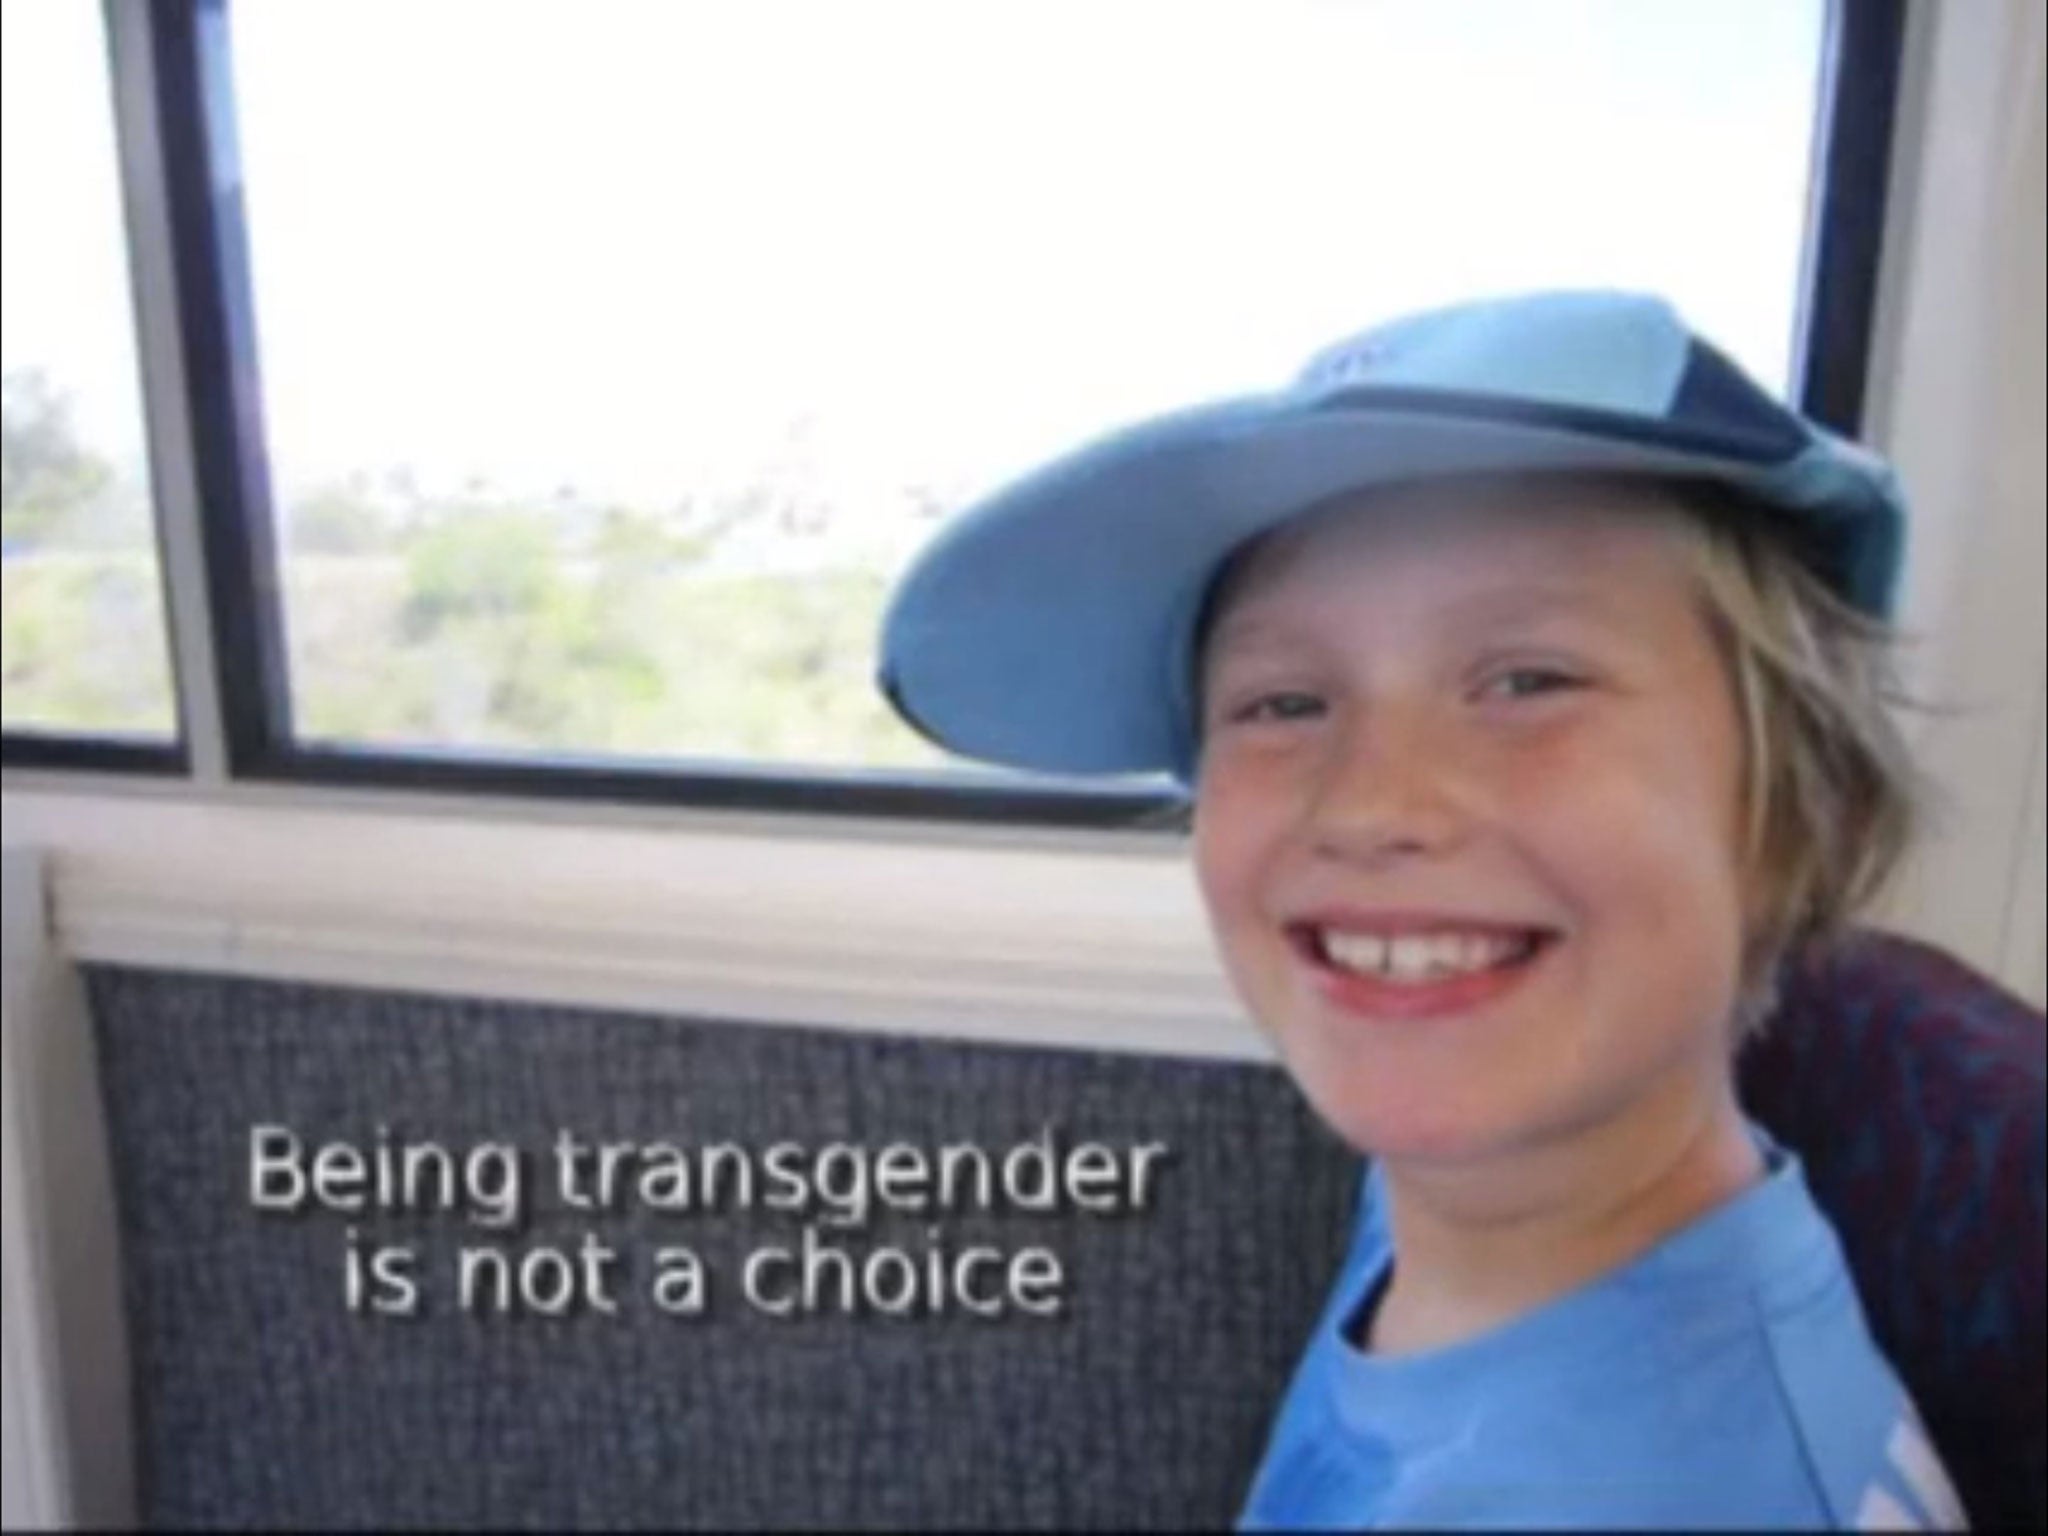 Renee Fabish posted the homemade movie, charting her transgender son Milla Taige Brown's journey, on Facebook